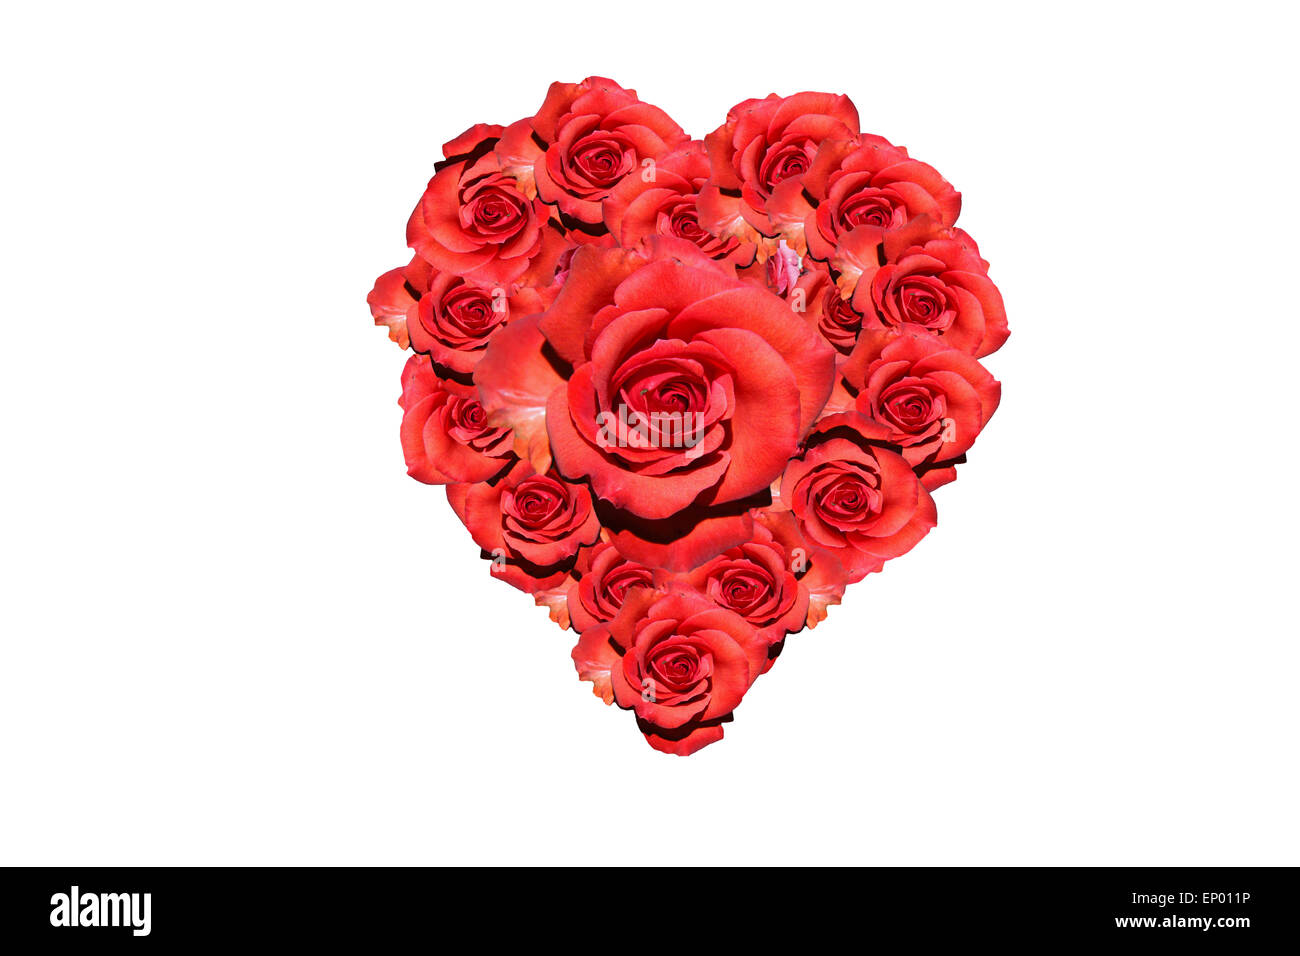 Herz: Rote Rosen - Symbolbild Liebe/ Valentinstag/ heart: red rose - symbolic image for love, afection and Valentines Day. Stock Photo